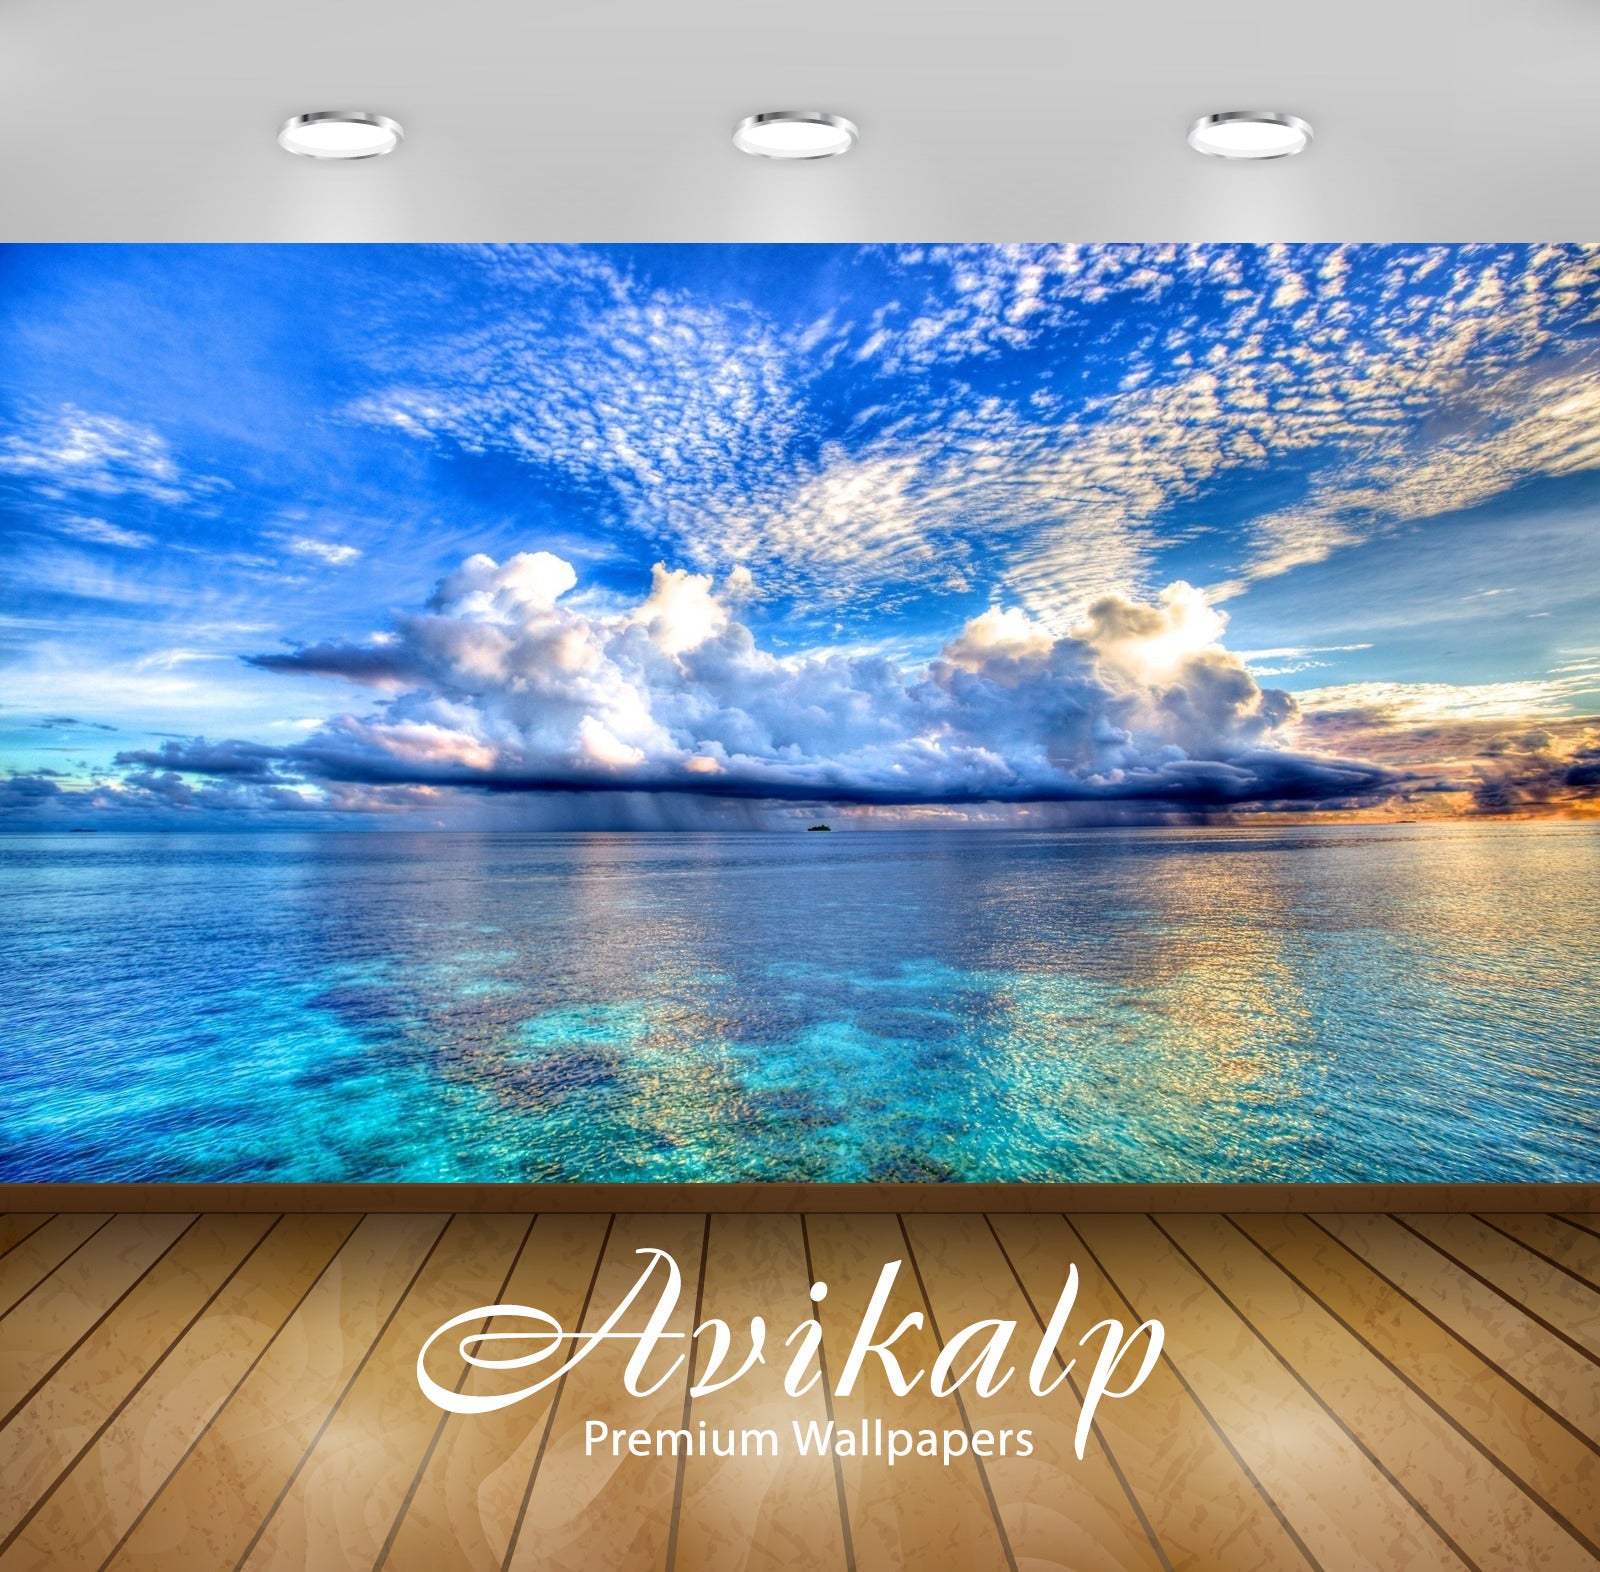 Avikalp Exclusive Awi1388 Ocean Live Full HD Wallpapers for Living room, Hall, Kids Room, Kitchen, T